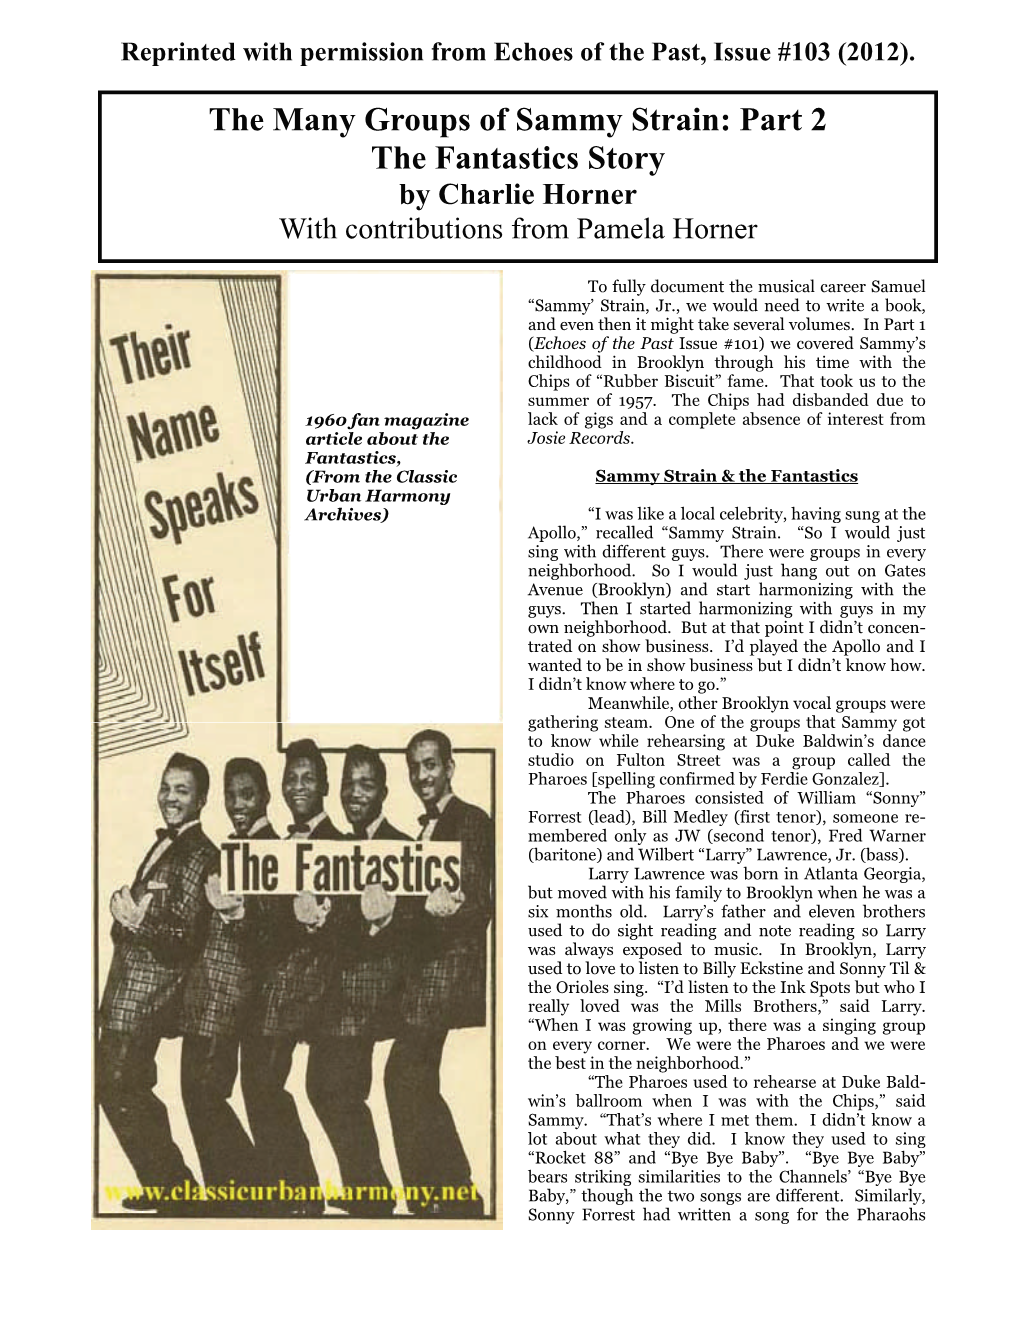 The Many Groups of Sammy Strain: Part 2 the Fantastics Story by Charlie Horner with Contributions from Pamela Horner